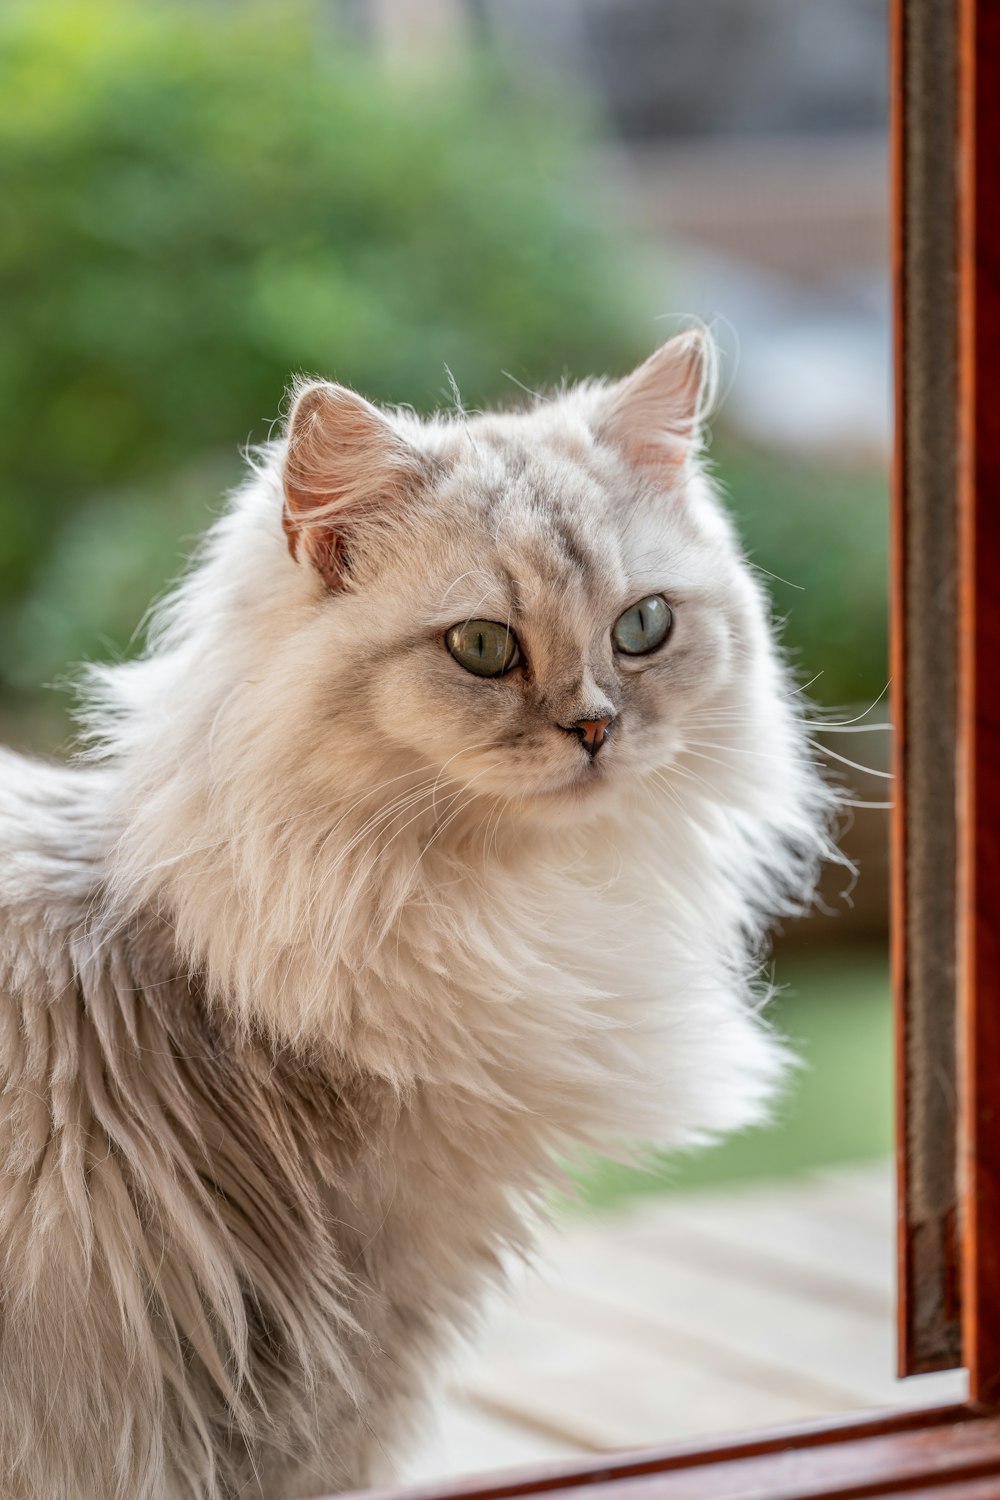 a fluffy white cat looking at itself in a mirror